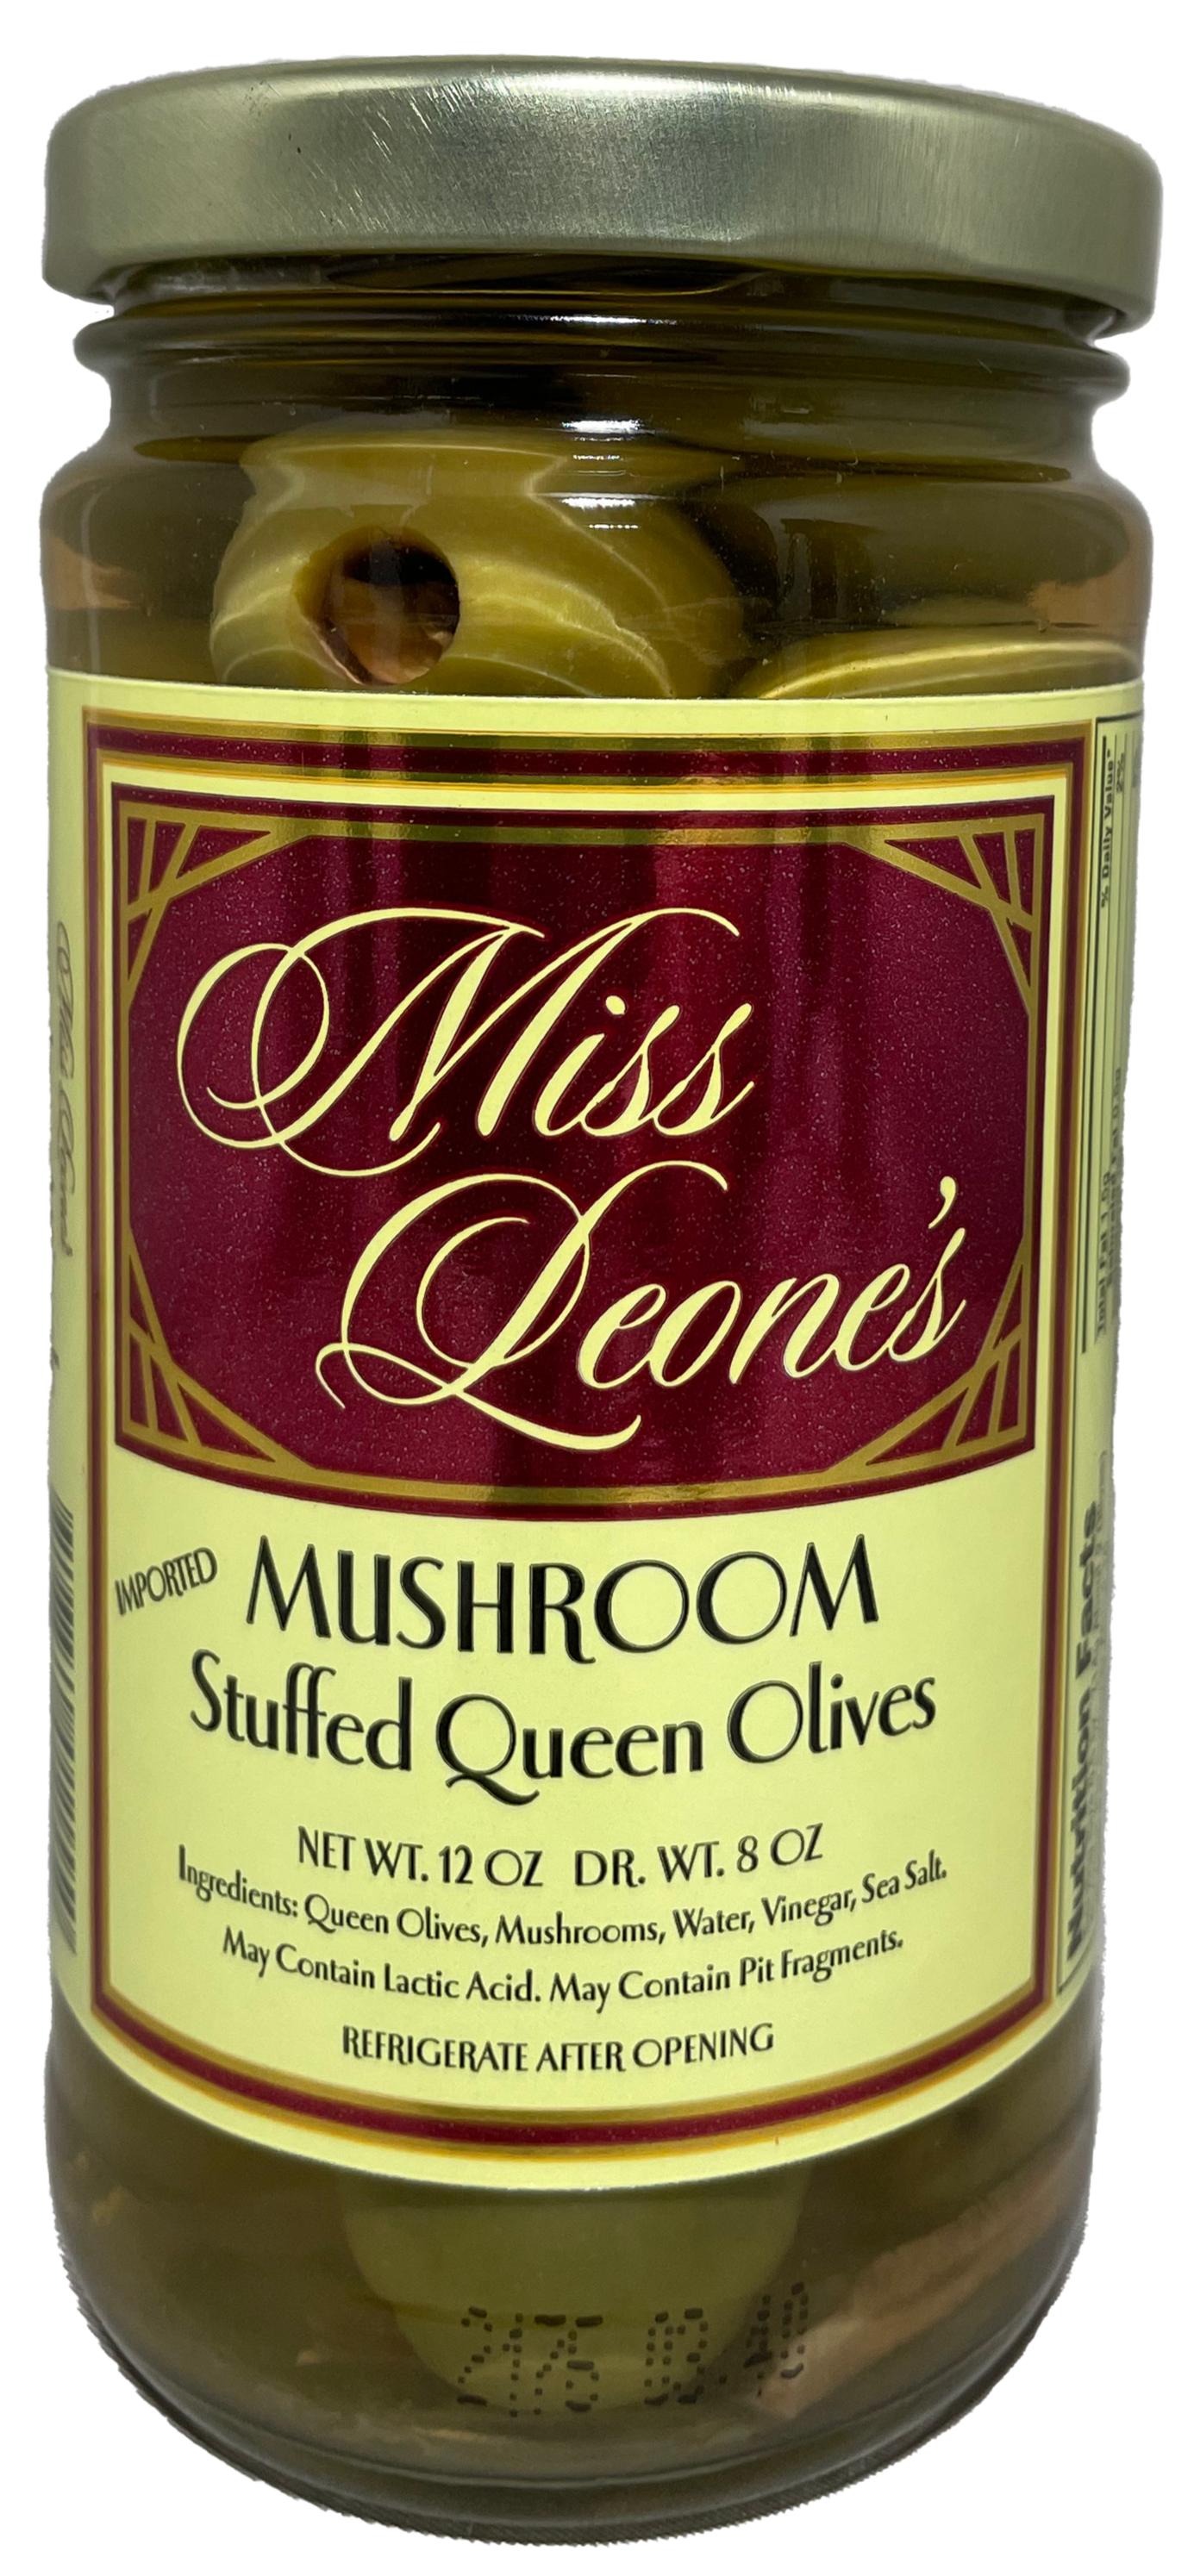 Mushroom Stuffed Queen Olives *NEW LOWER PRICE*